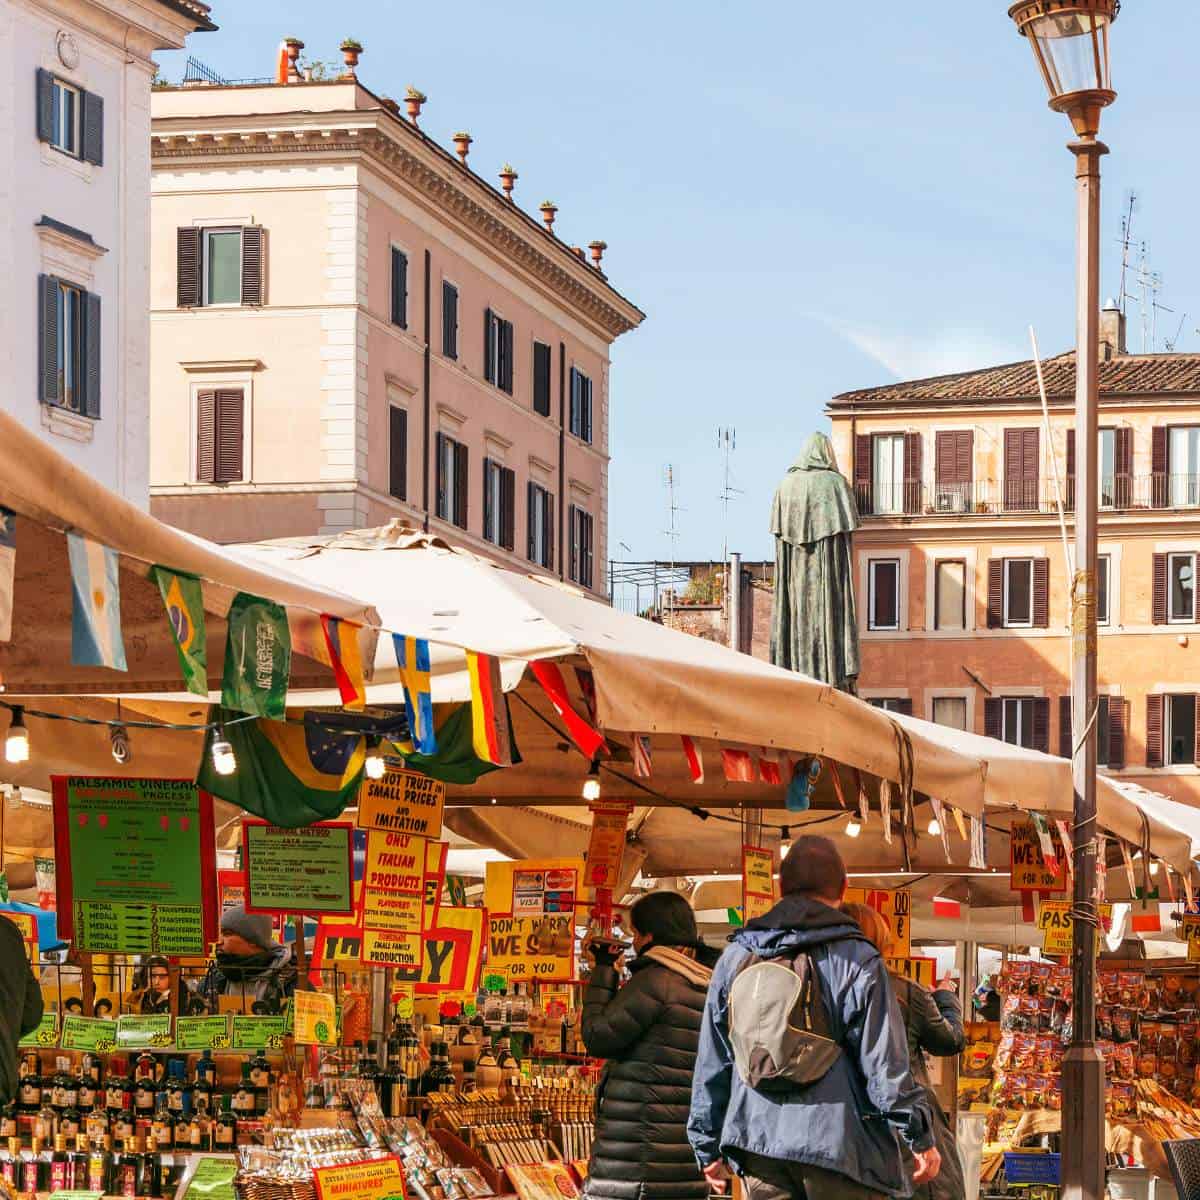 A bustling outdoor market in Rome featuring mouthwatering street food options that attract people walking around.